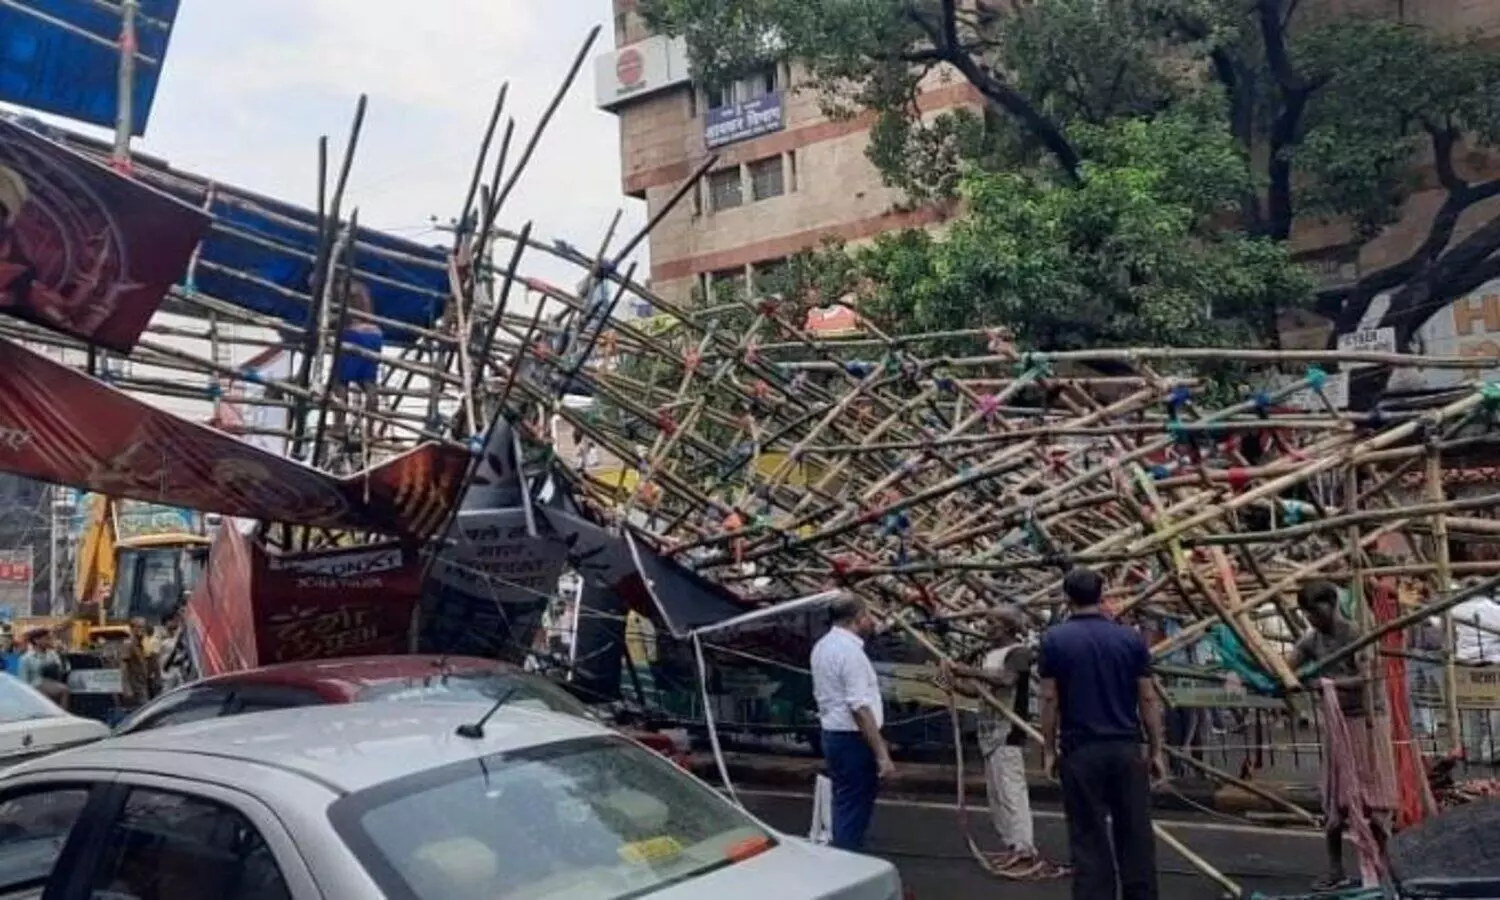 patna puja pandal archway suddenly collapsed